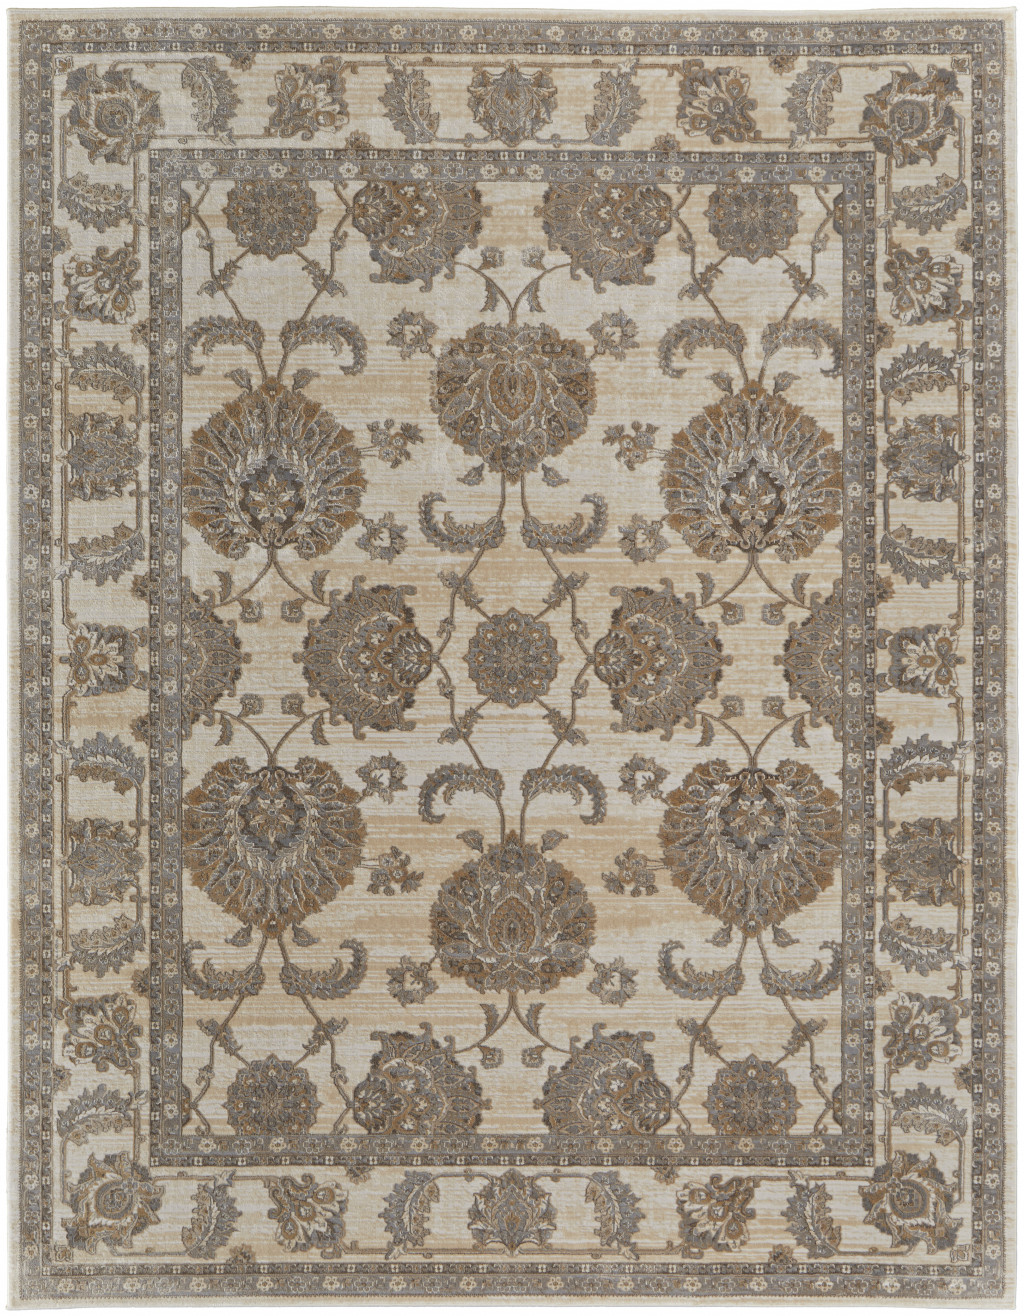 2' X 3' Tan Ivory And Brown Power Loom Area Rug-515503-1